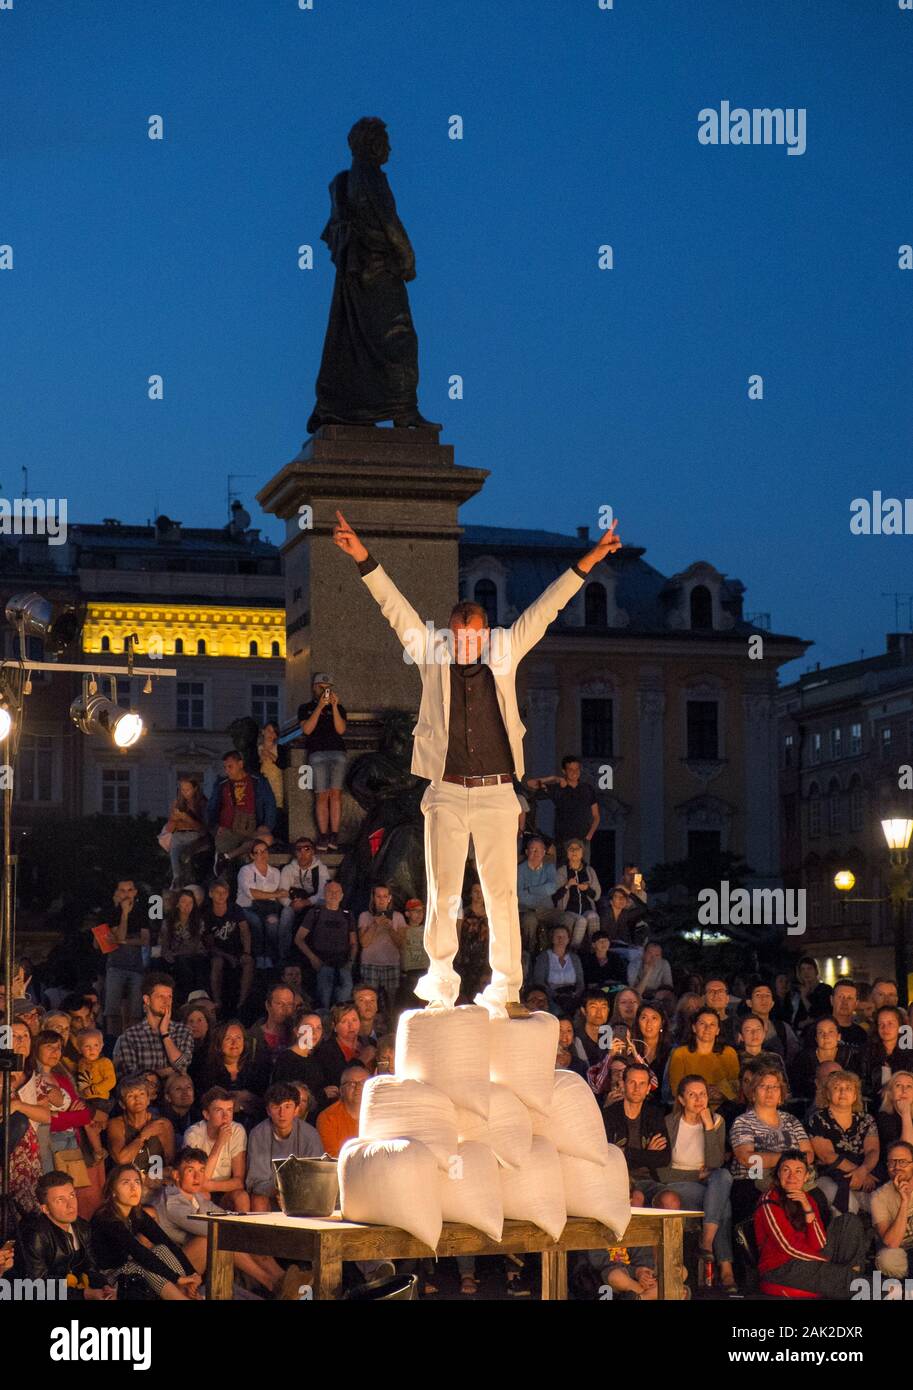 A street performer performs an act in front of a crowd in the main square, Krakow, Poland Stock Photo